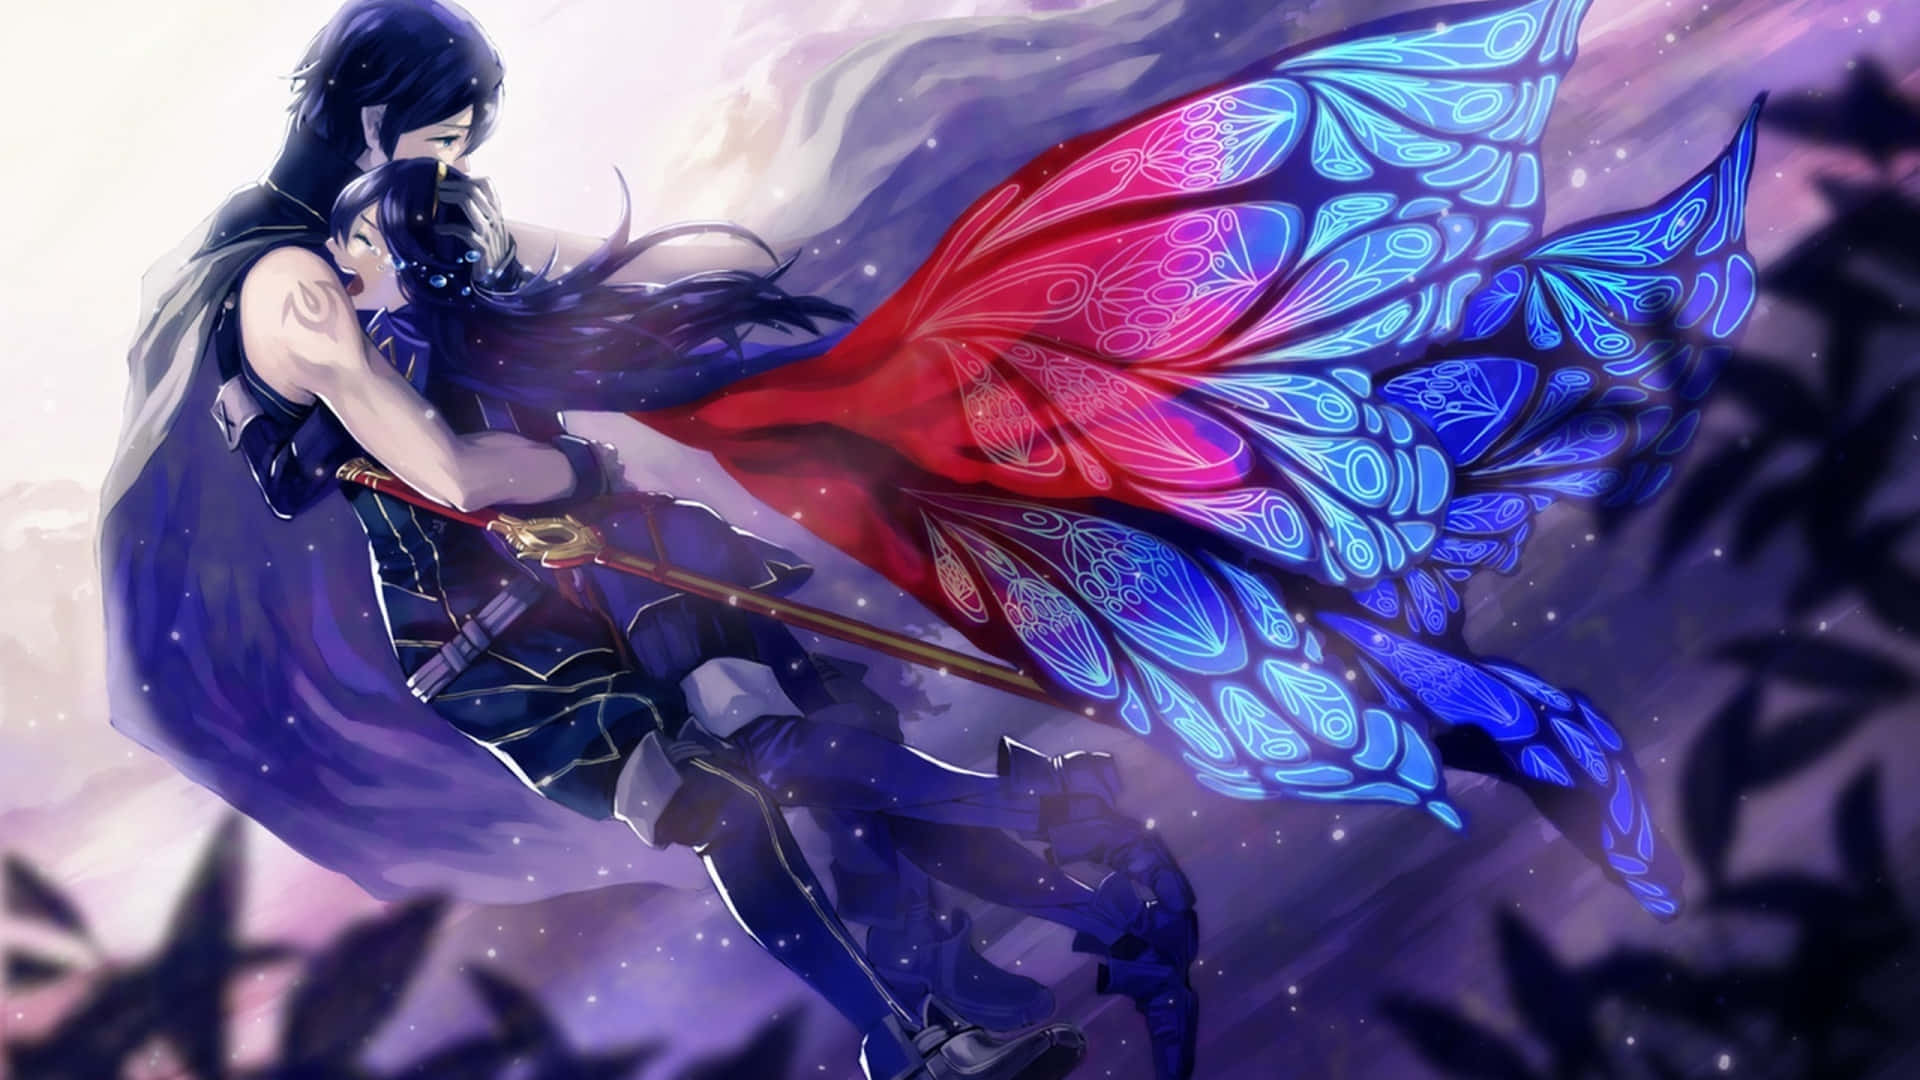 Feel the power of art with Lucina Wallpaper